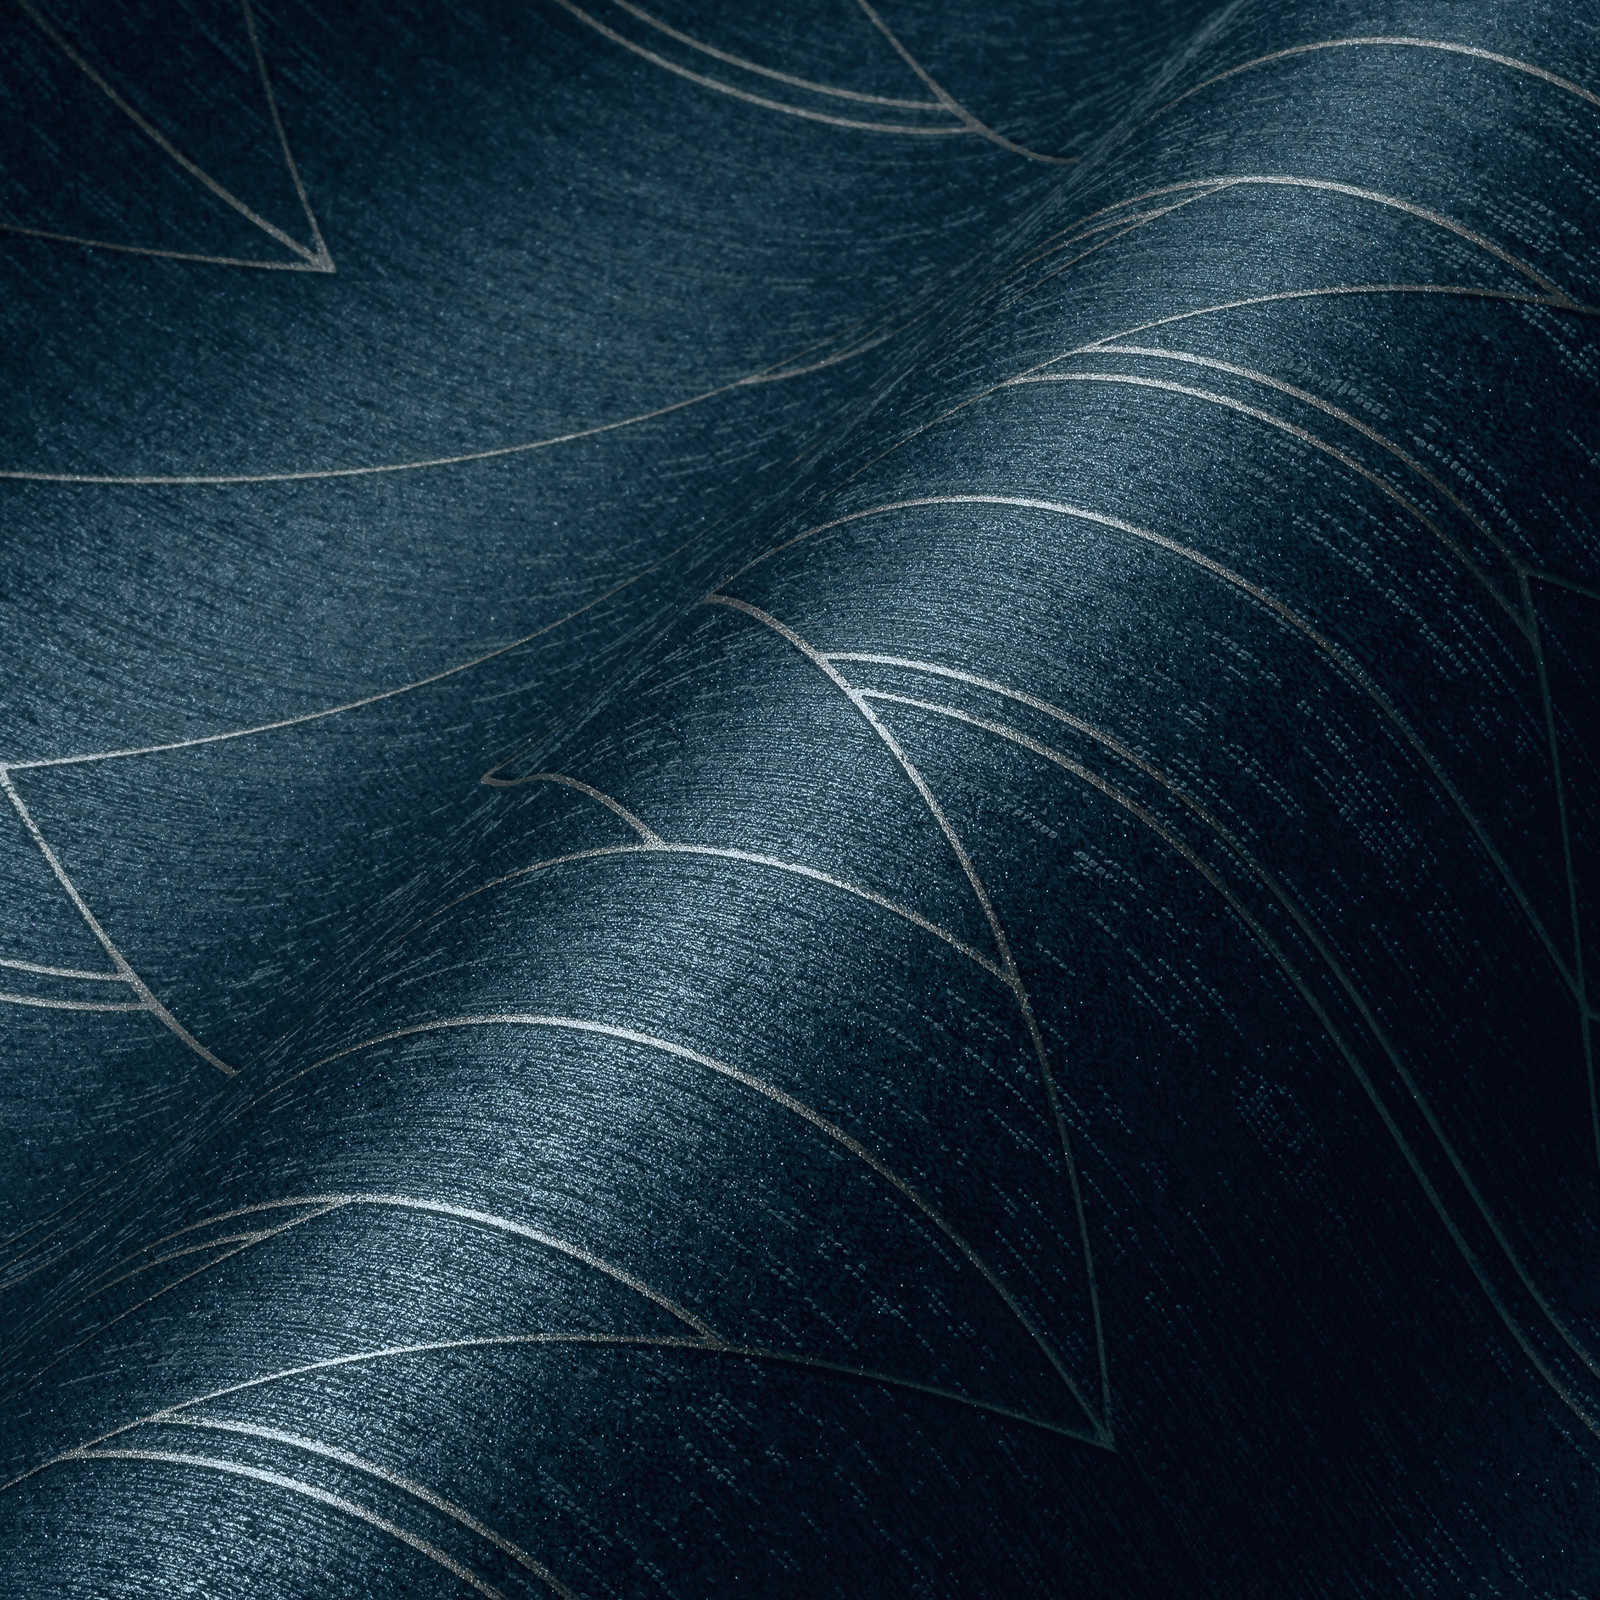             Dark blue wallpaper with silver graphic pattern & glossy effect - blue, metallic
        